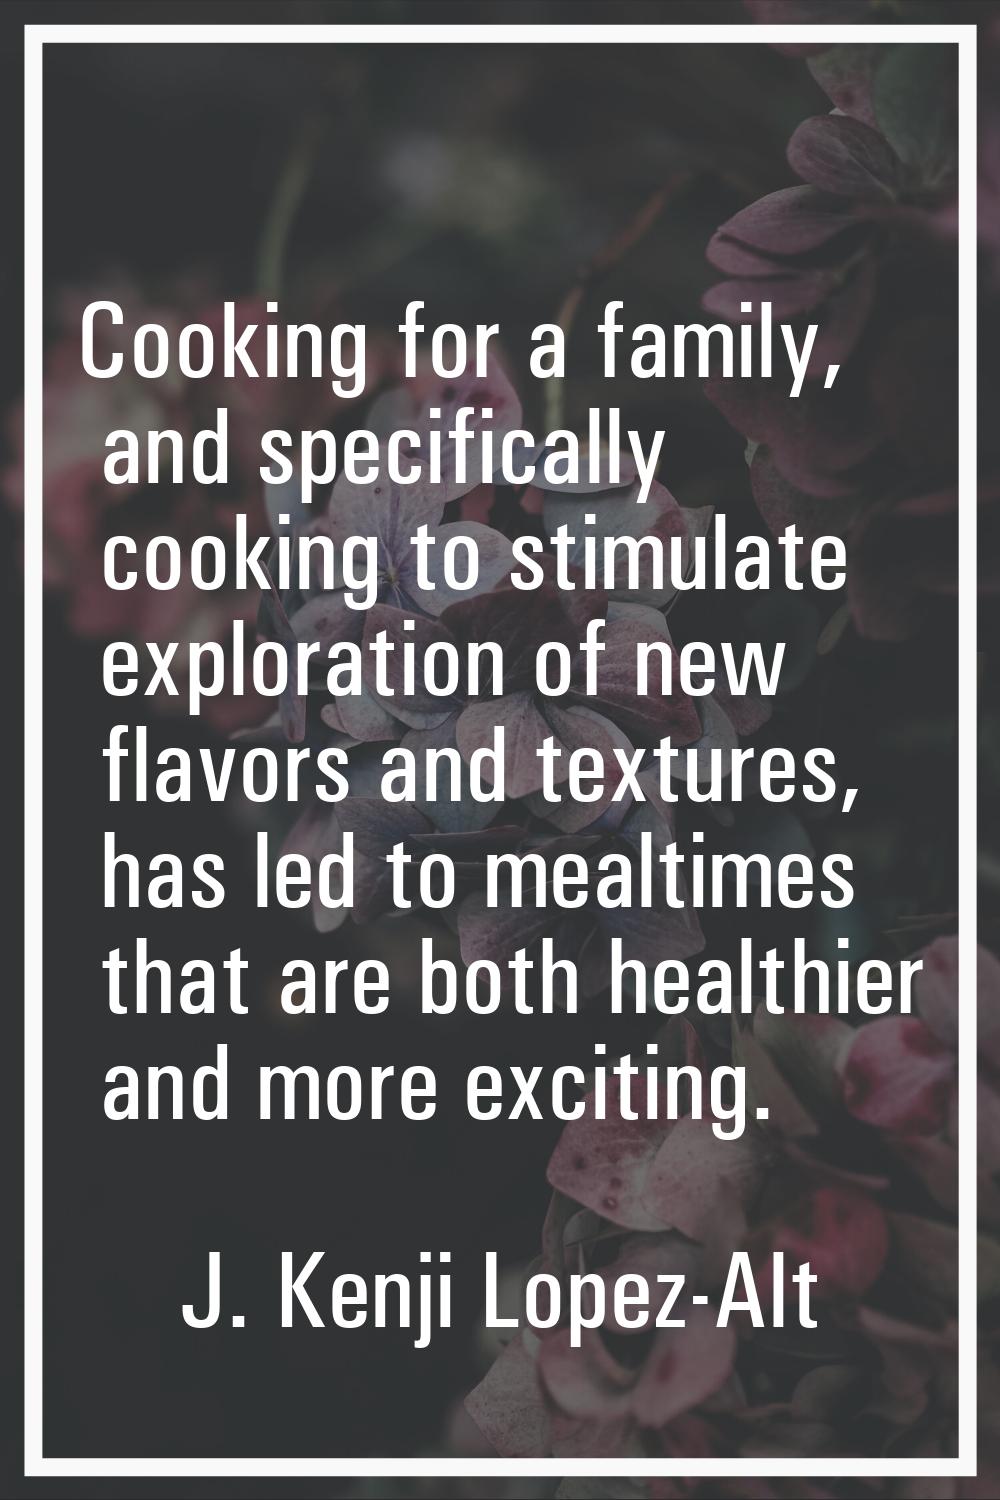 Cooking for a family, and specifically cooking to stimulate exploration of new flavors and textures